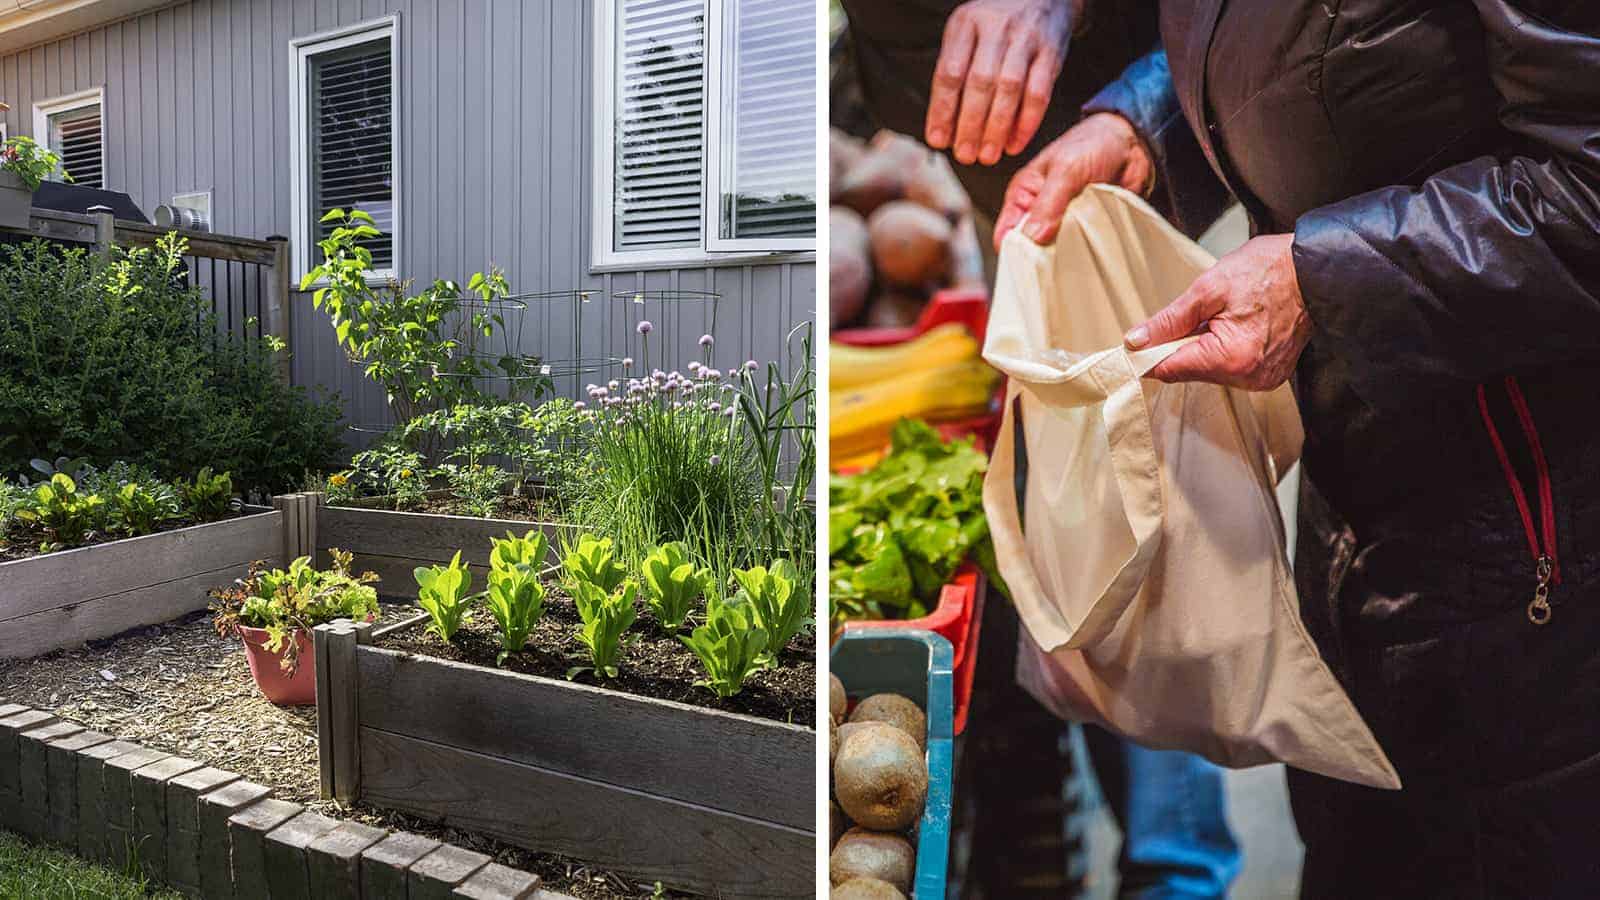 15 Habits That Help Make a More Sustainable Planet